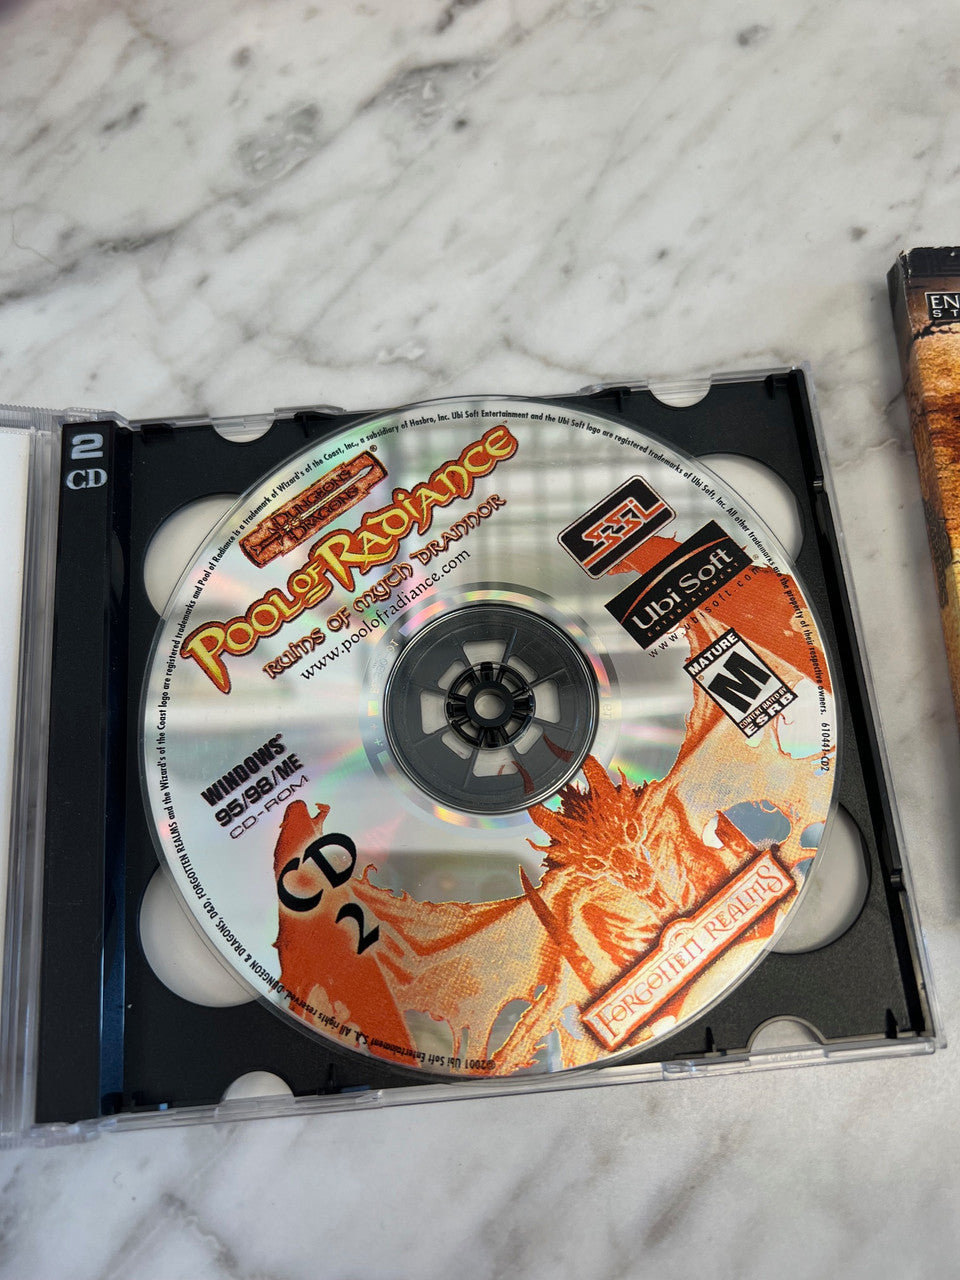 Pool Of Radiance ~ Ruins of Myth Drannor (Dungeons & Dragons) - PC/CD Rom Game